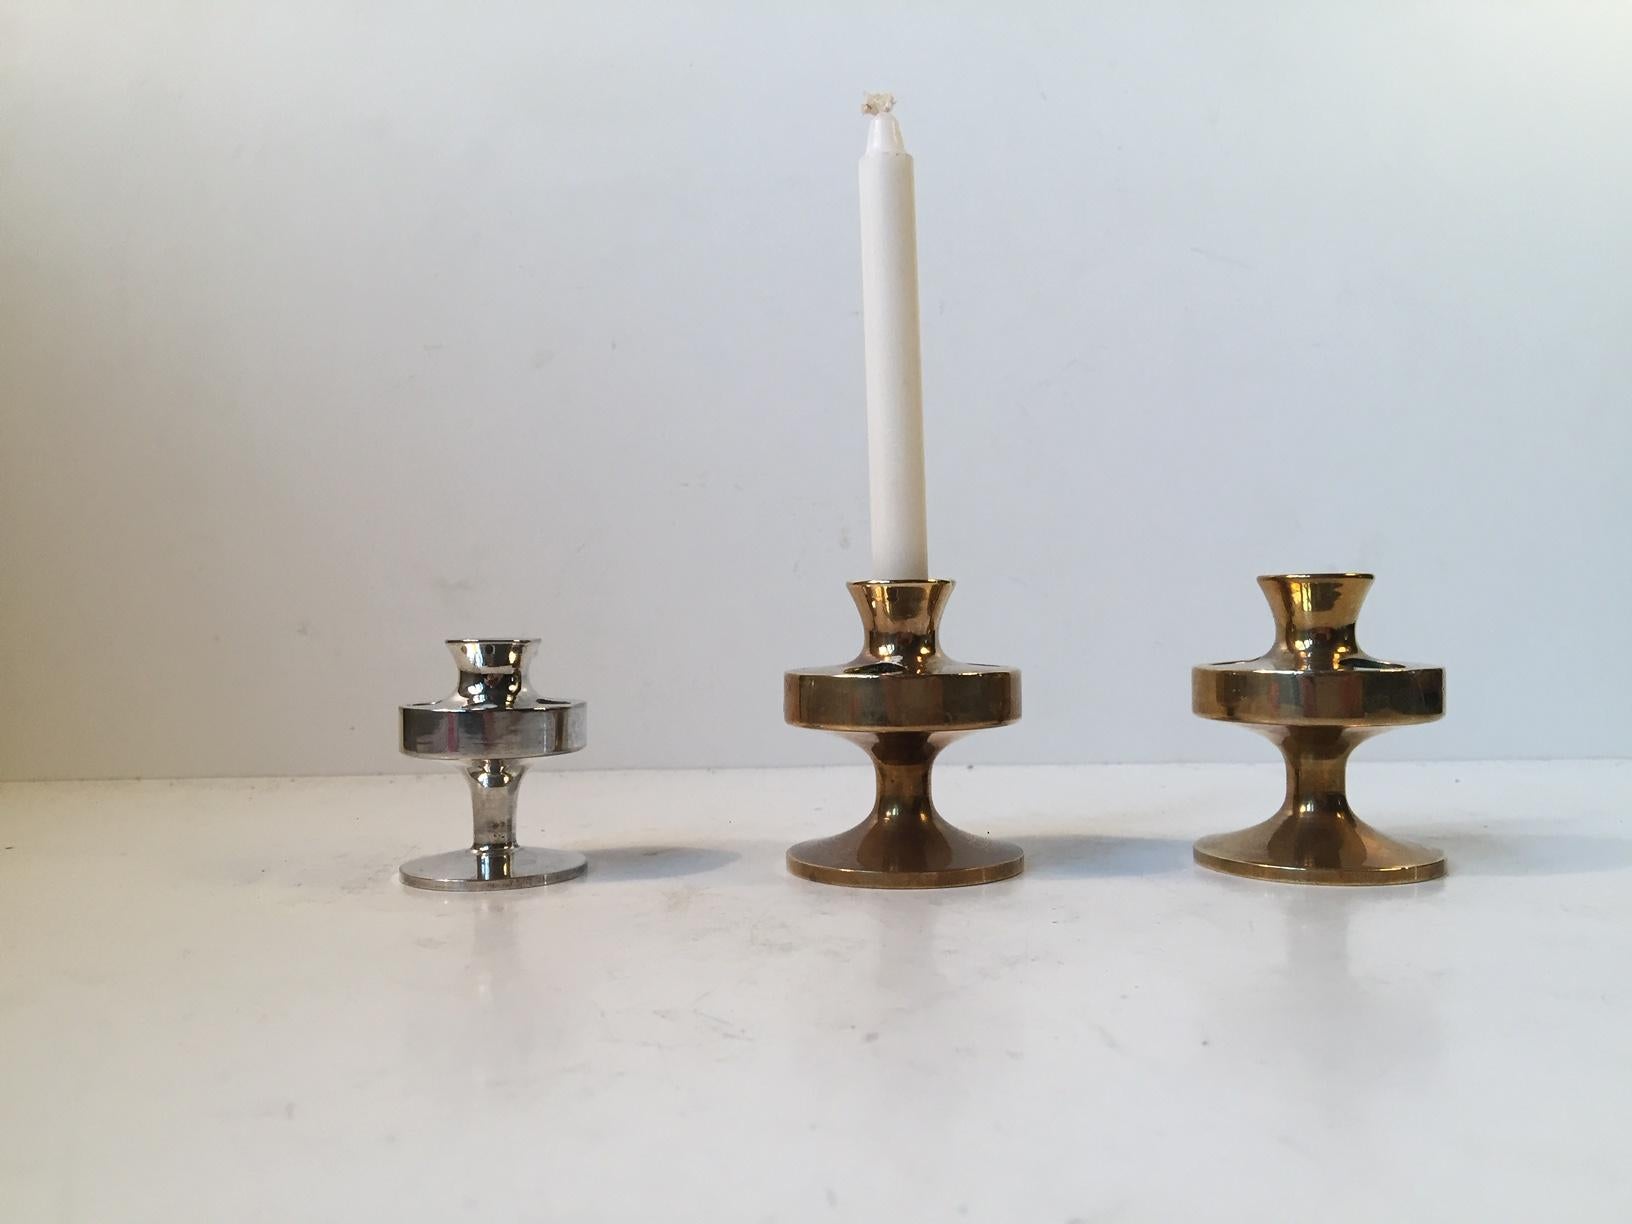 - A set of 3 small taper candleholders
- Two pieces in brass and a silver plated smaller one
- The candleholders can contain 4 and 5 candles
- The silver plated candleholder measures 5 cm in height
- The brass candleholders measure 6 cm in